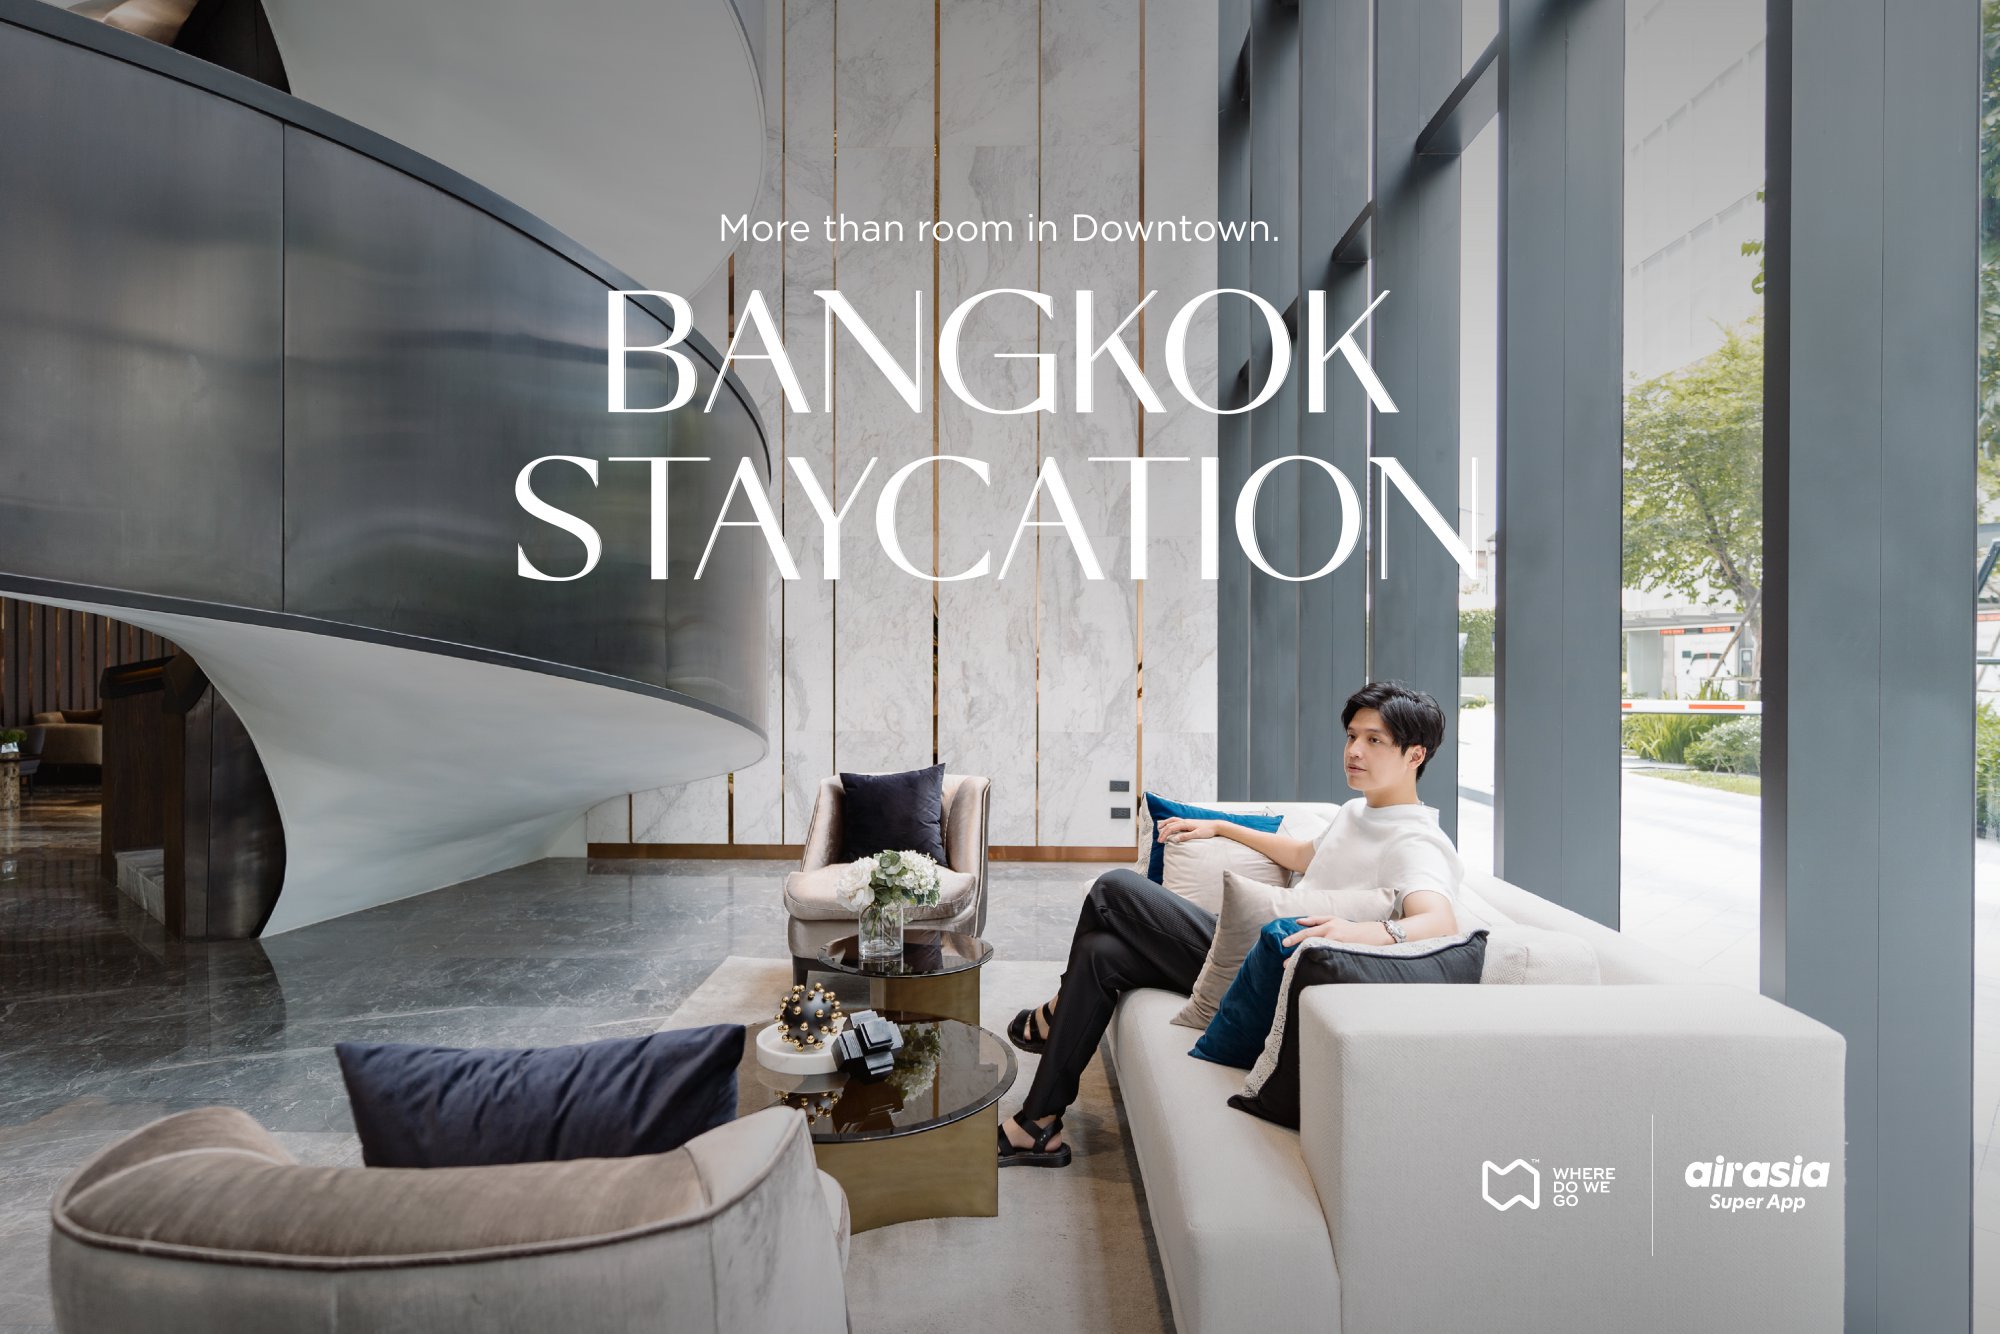 Bangkok Staycation, More than room in Downtown.